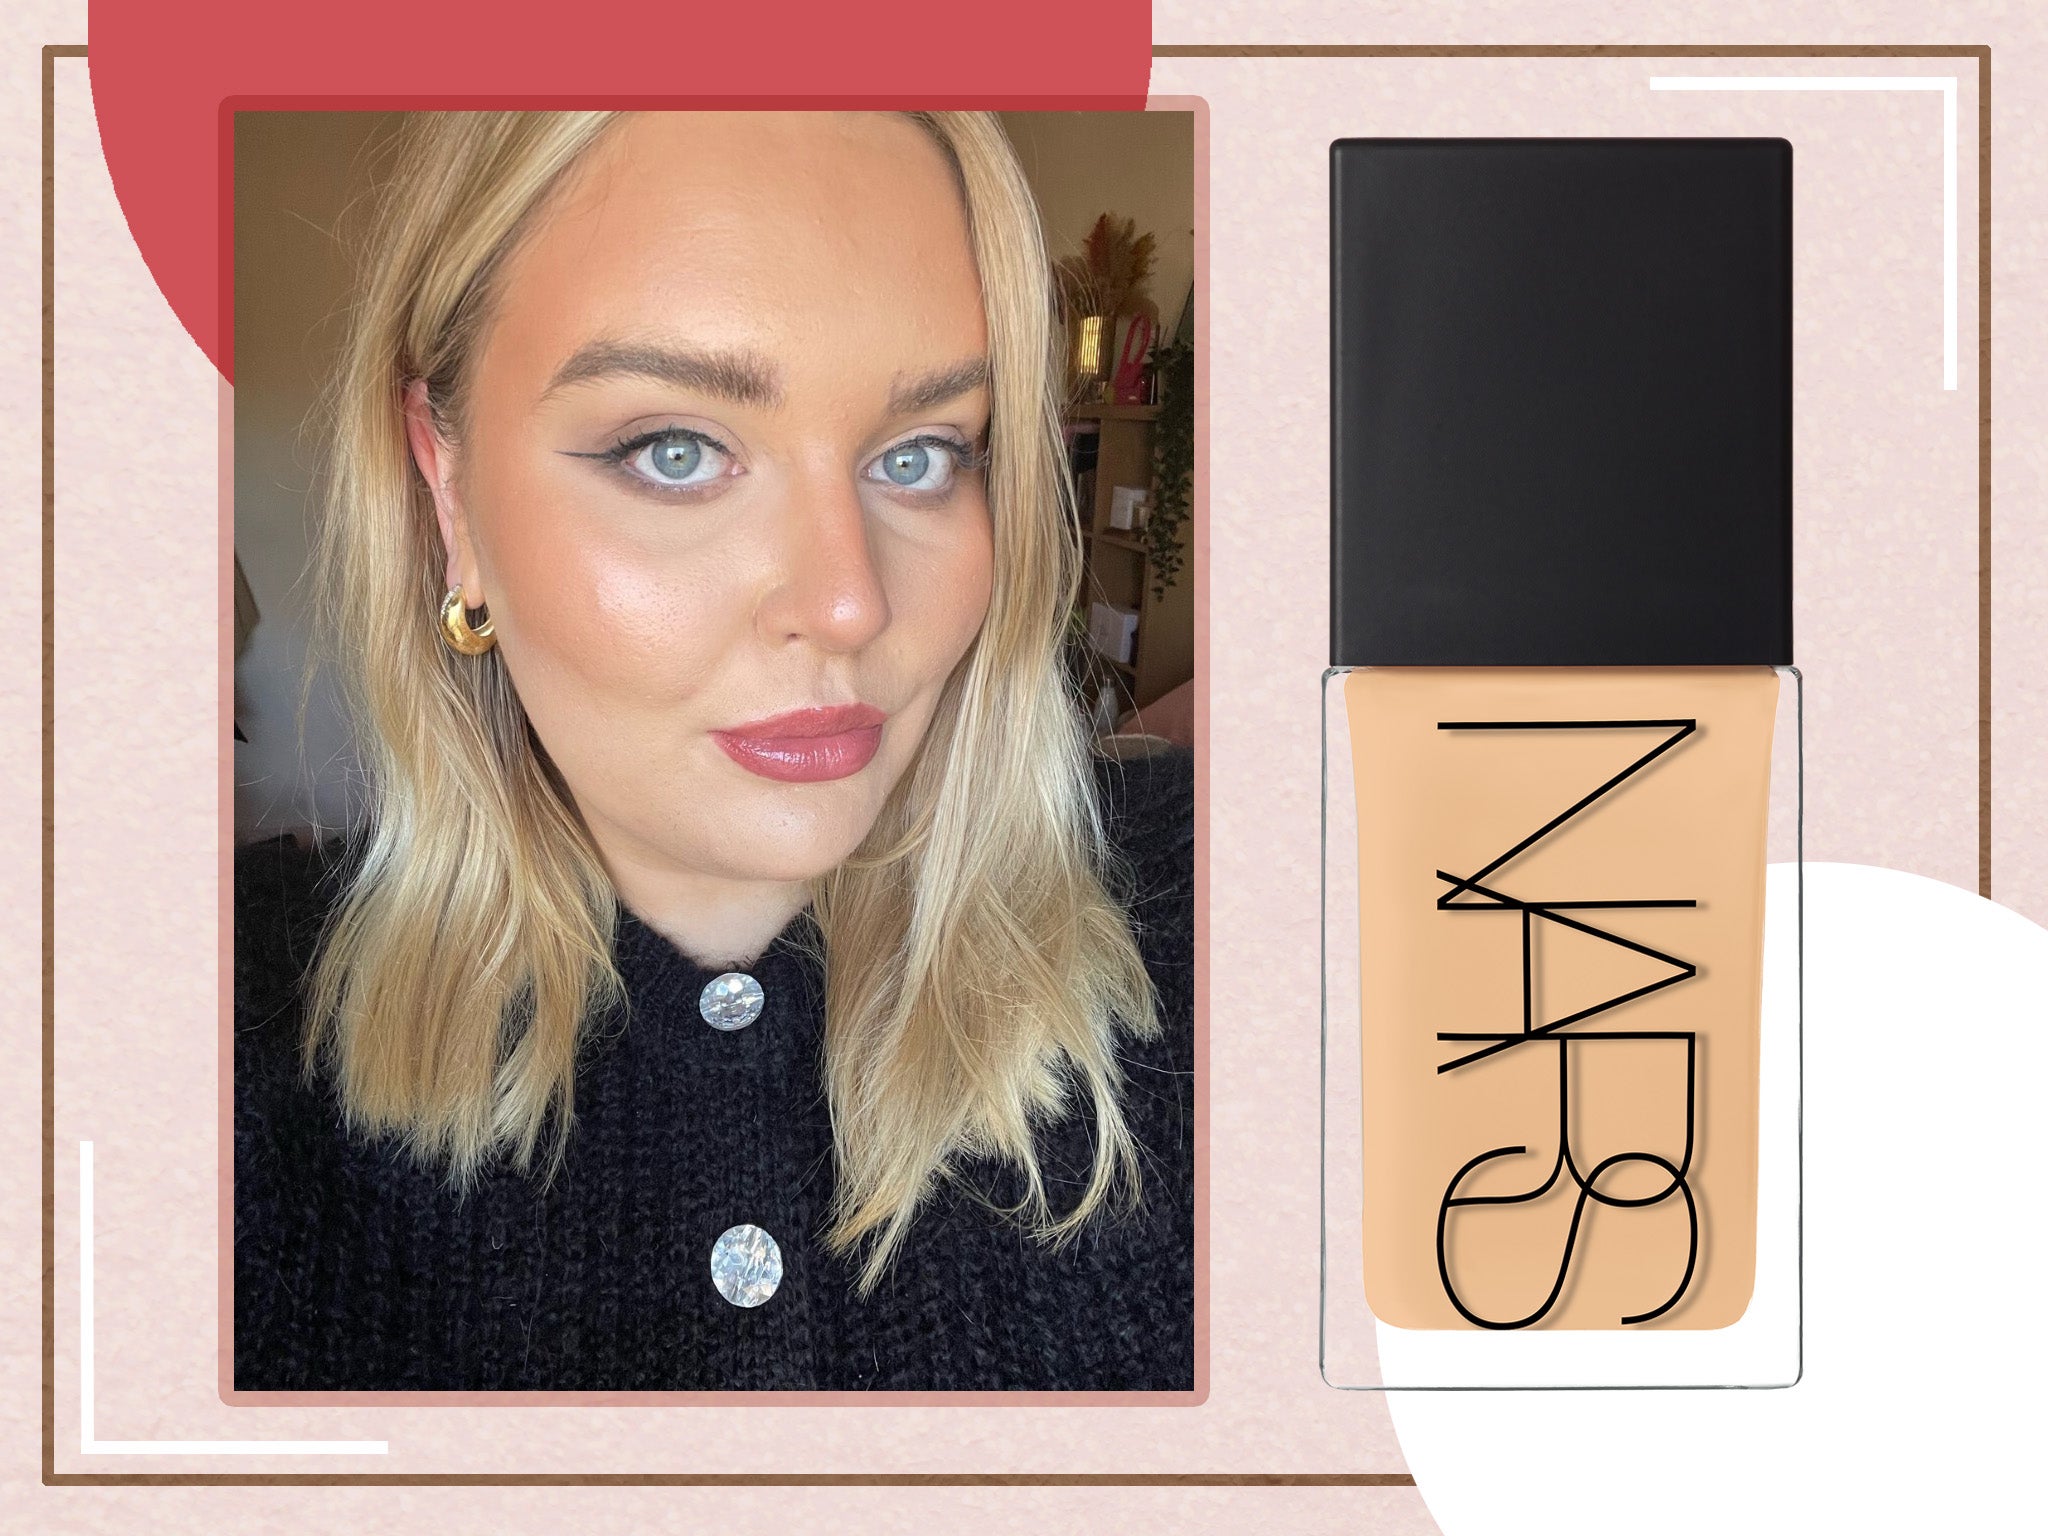 TWO NEW FOUNDATION REVIEWS  NARS LIGHT REFLECTING FOUNDATION AND CHANEL  NO. 1 FOUNDATION 